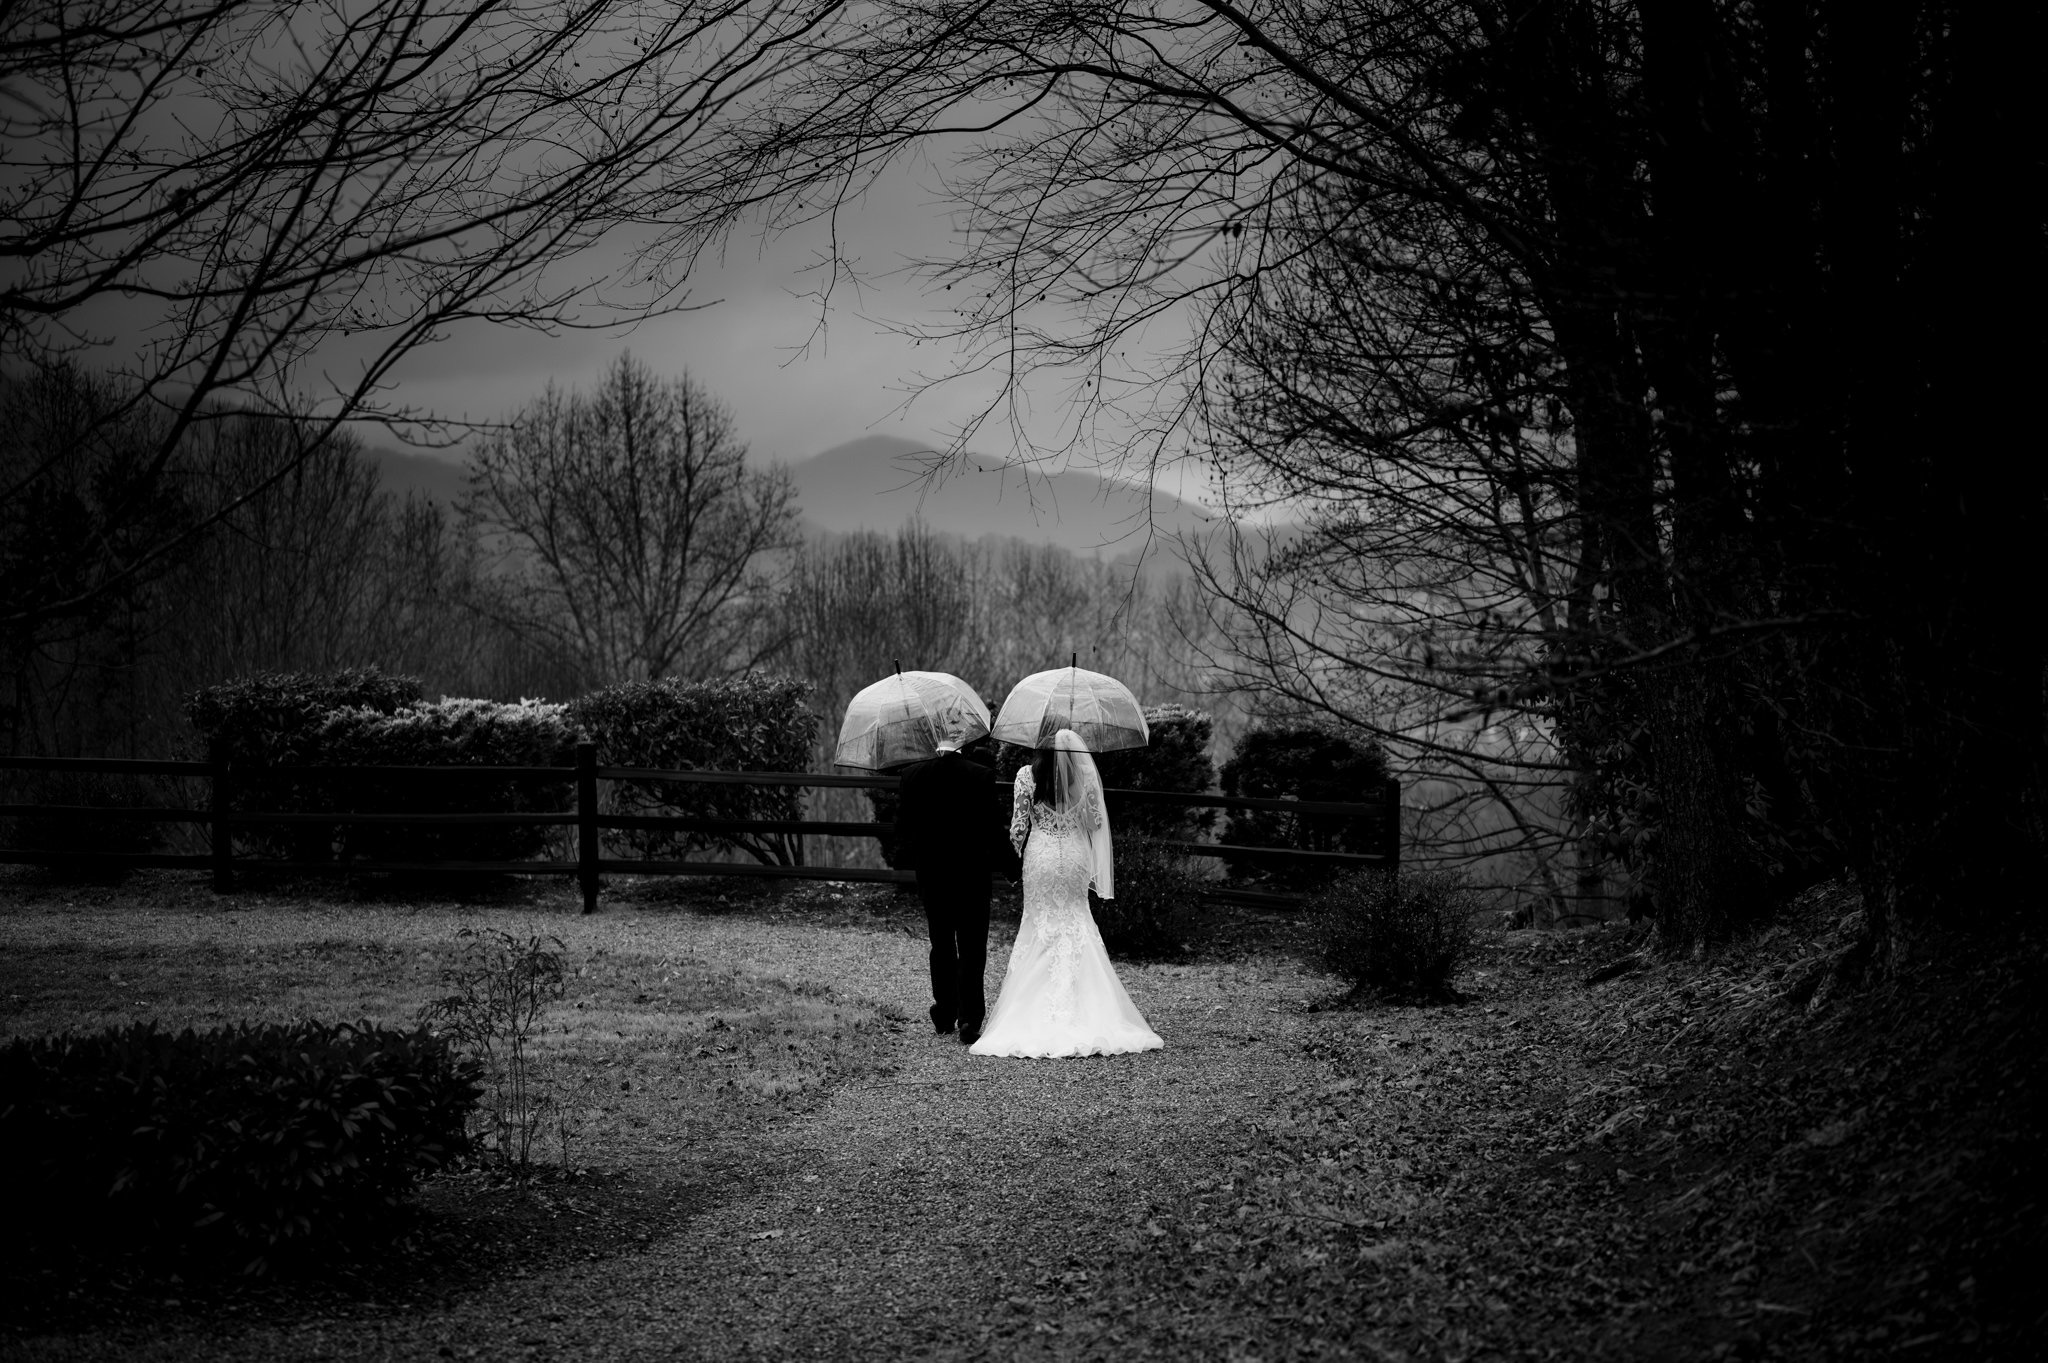 Asheville NC wedding photographer capturing a bride and groom walking down a path with umbrellas.